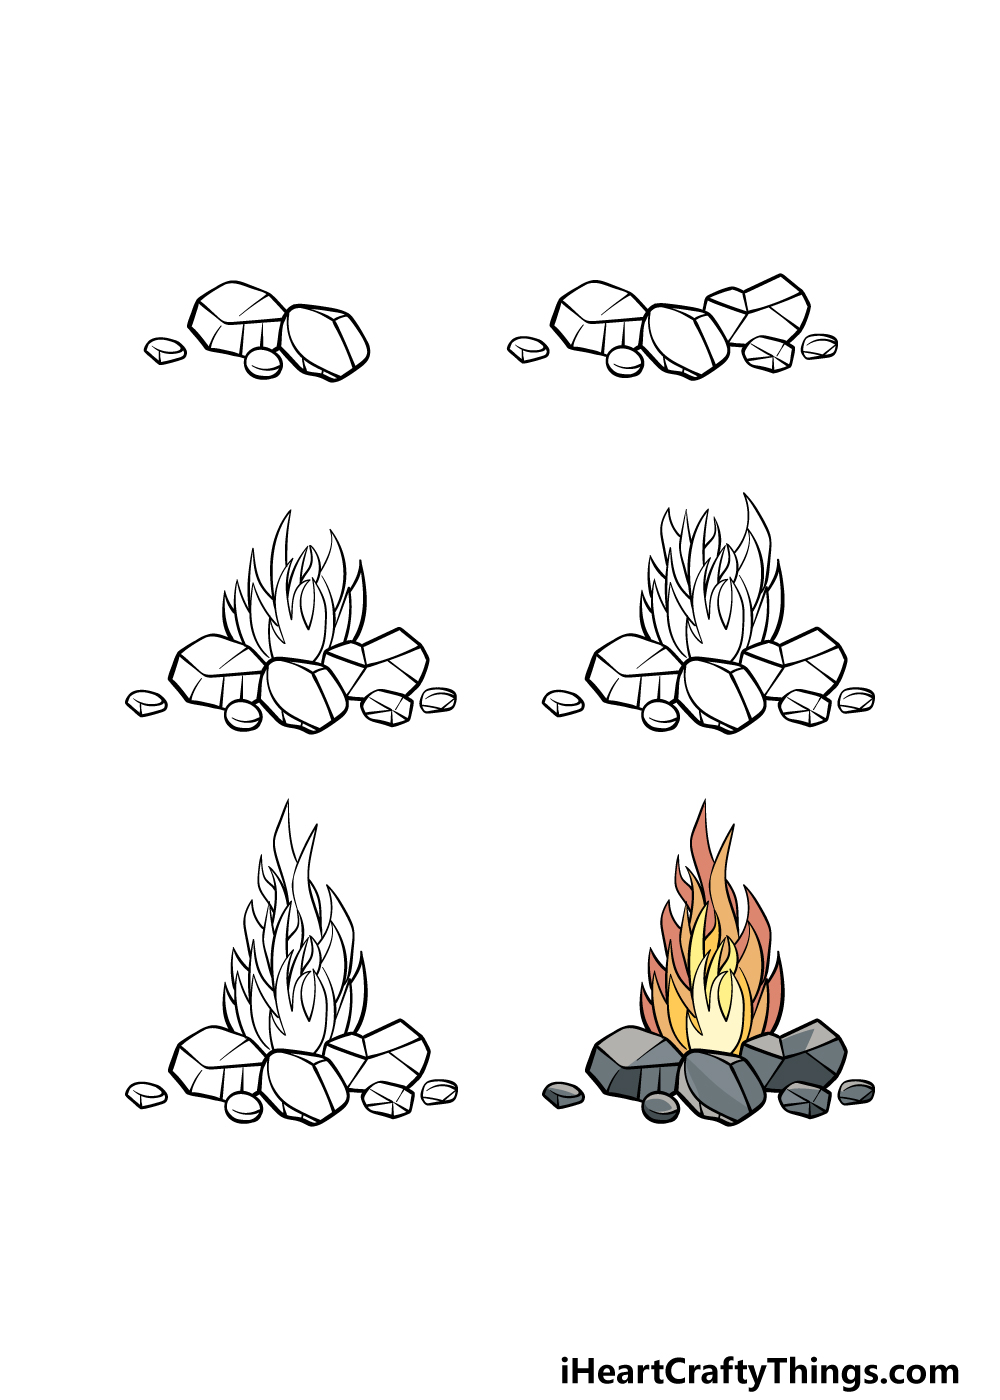 how to draw a cartoon fire in 6 steps